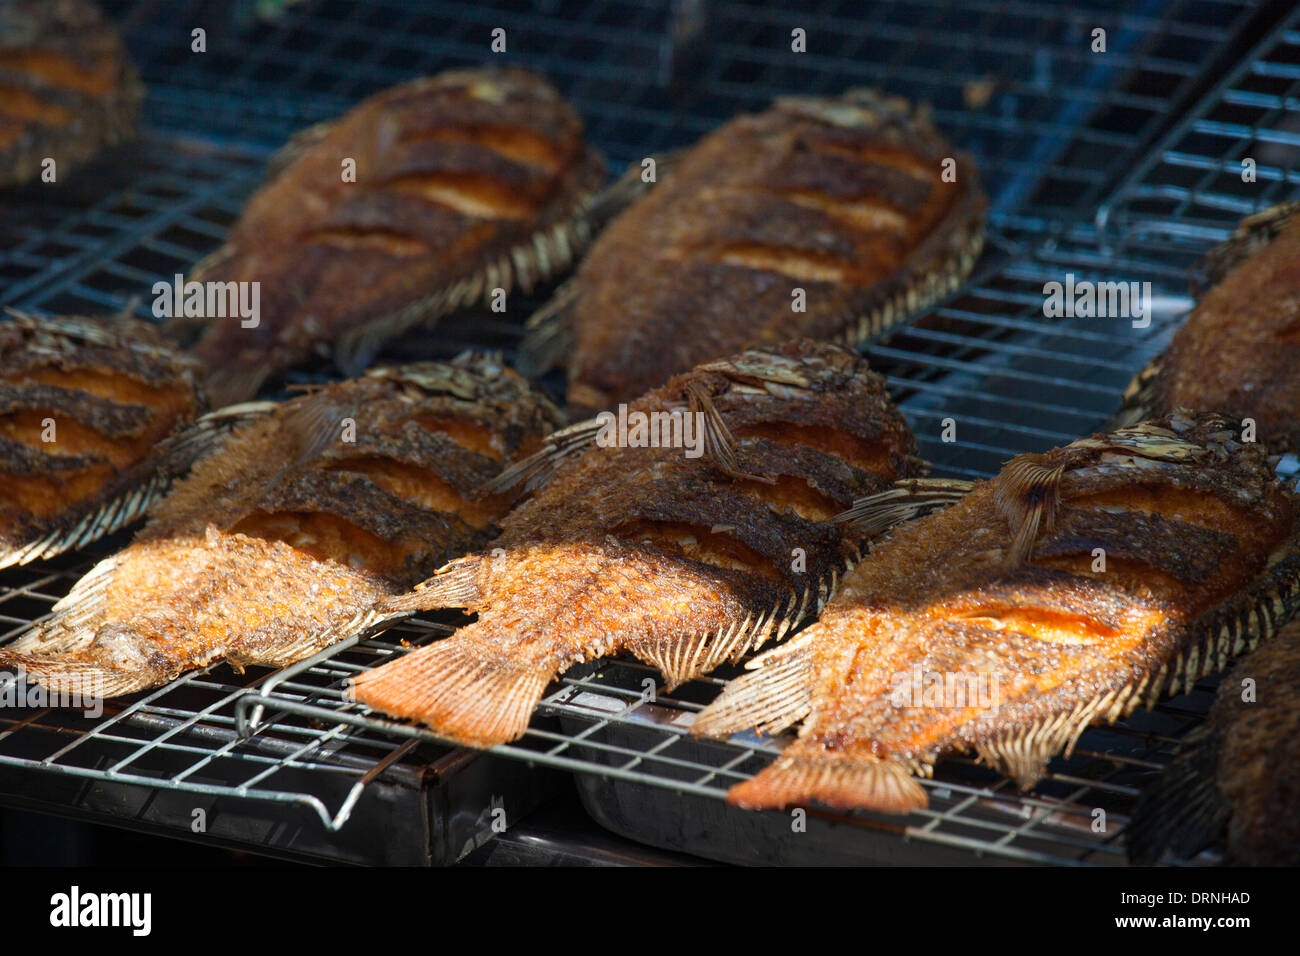 Grilled fish at a street stall in Bangkok, Thailand Stock Photo